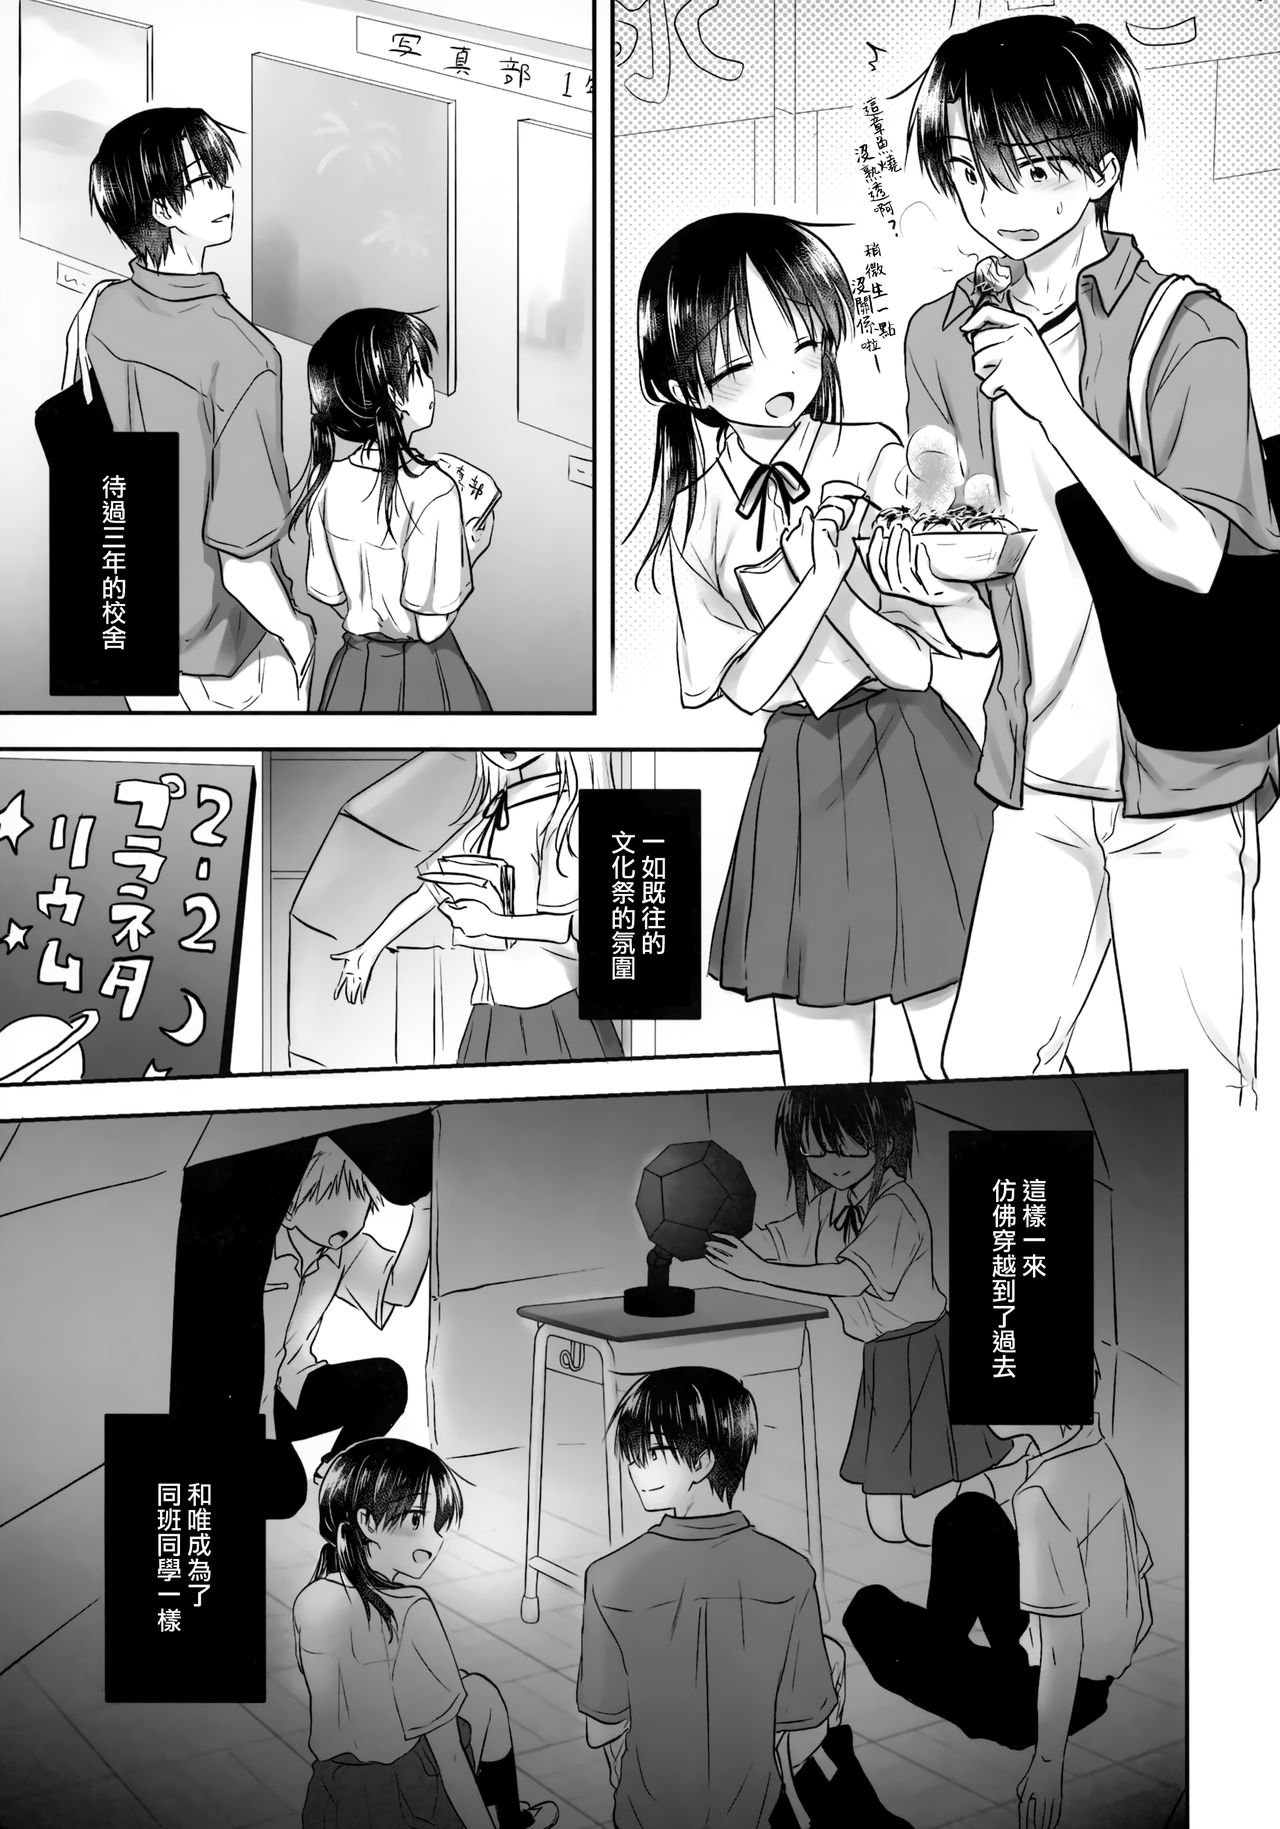 (C96) [Aquadrop (Mikami Mika)] Omoide Sex [Chinese] [山樱汉化] page 14 full